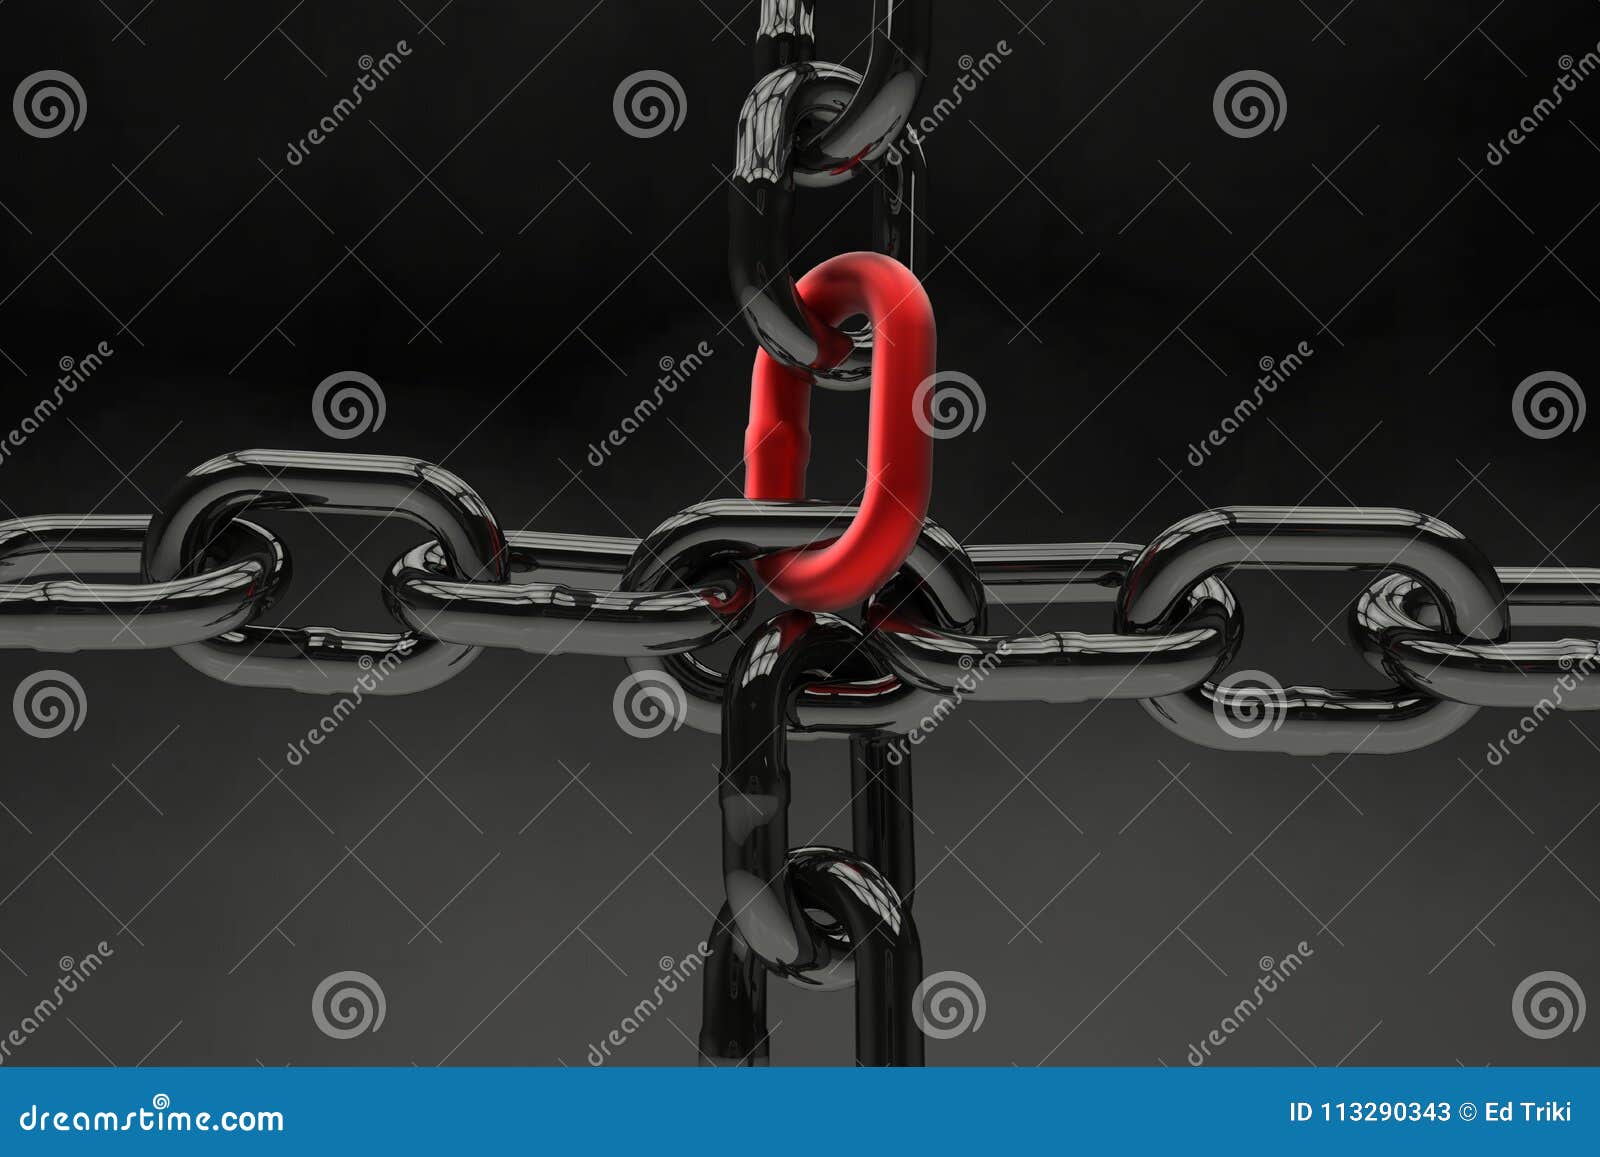 a metal chain with a quick red fix